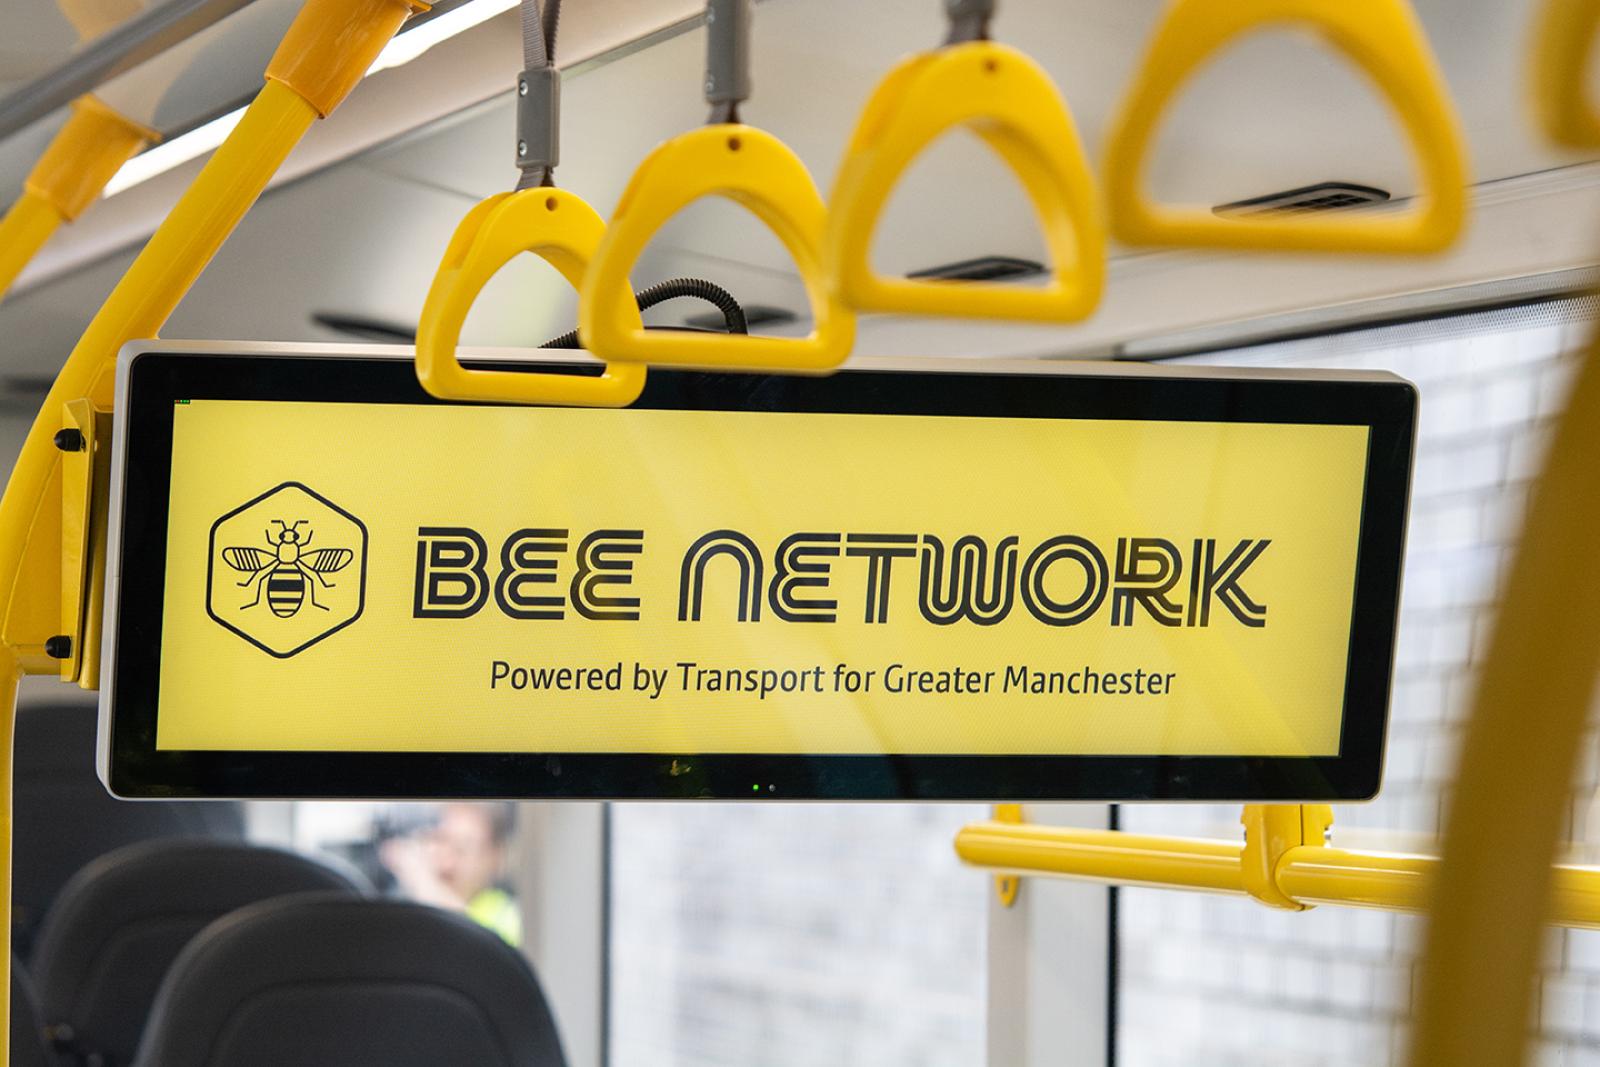 A Bee Network display on a bus